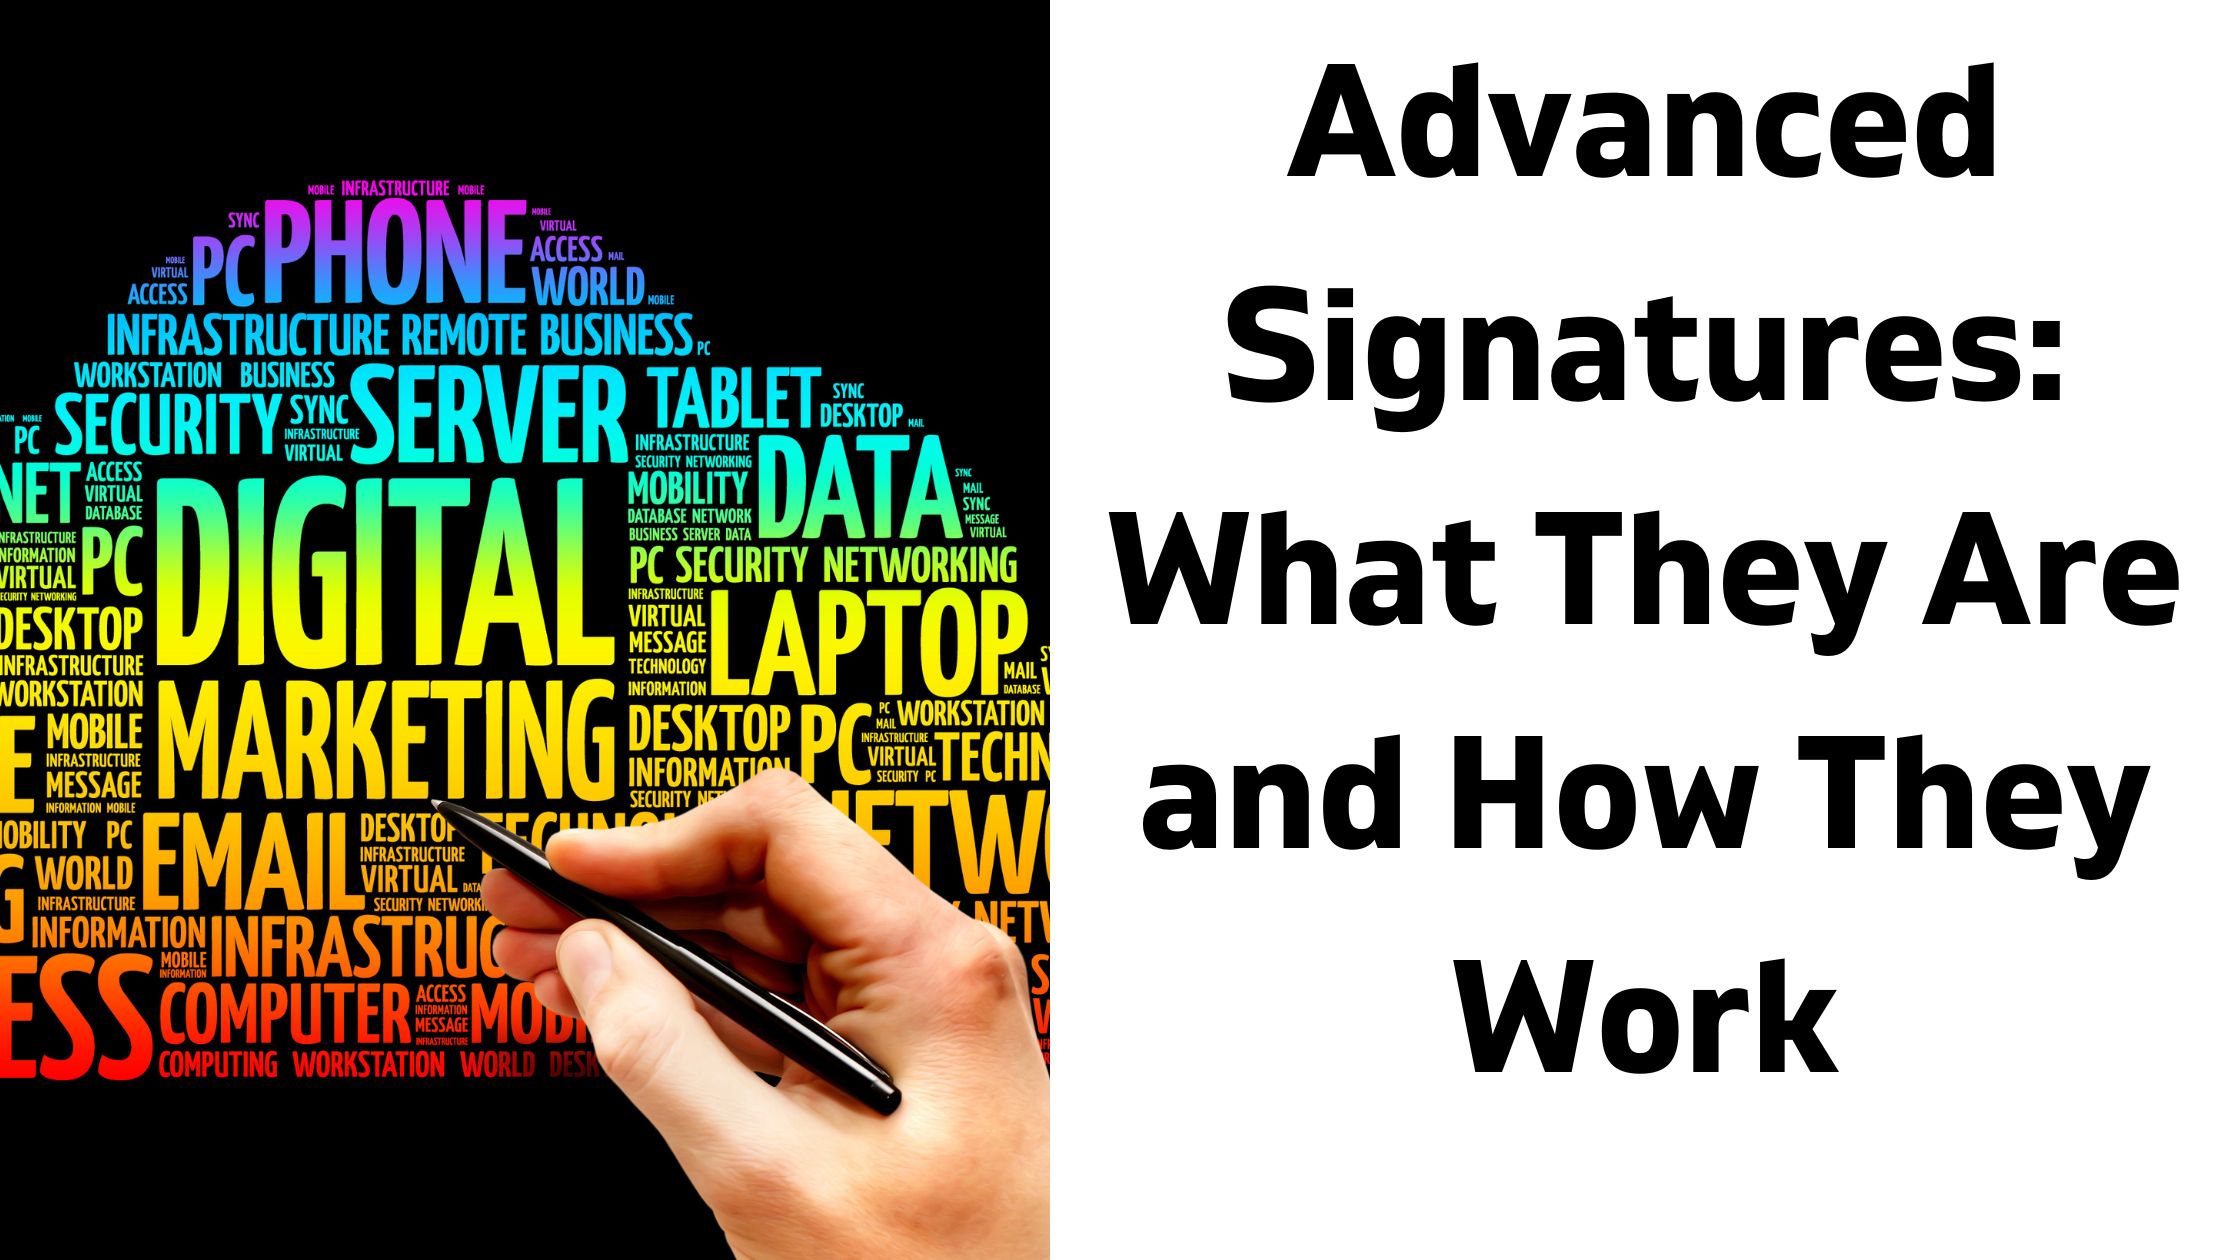 Advanced Signatures: What They Are and How They Work￼